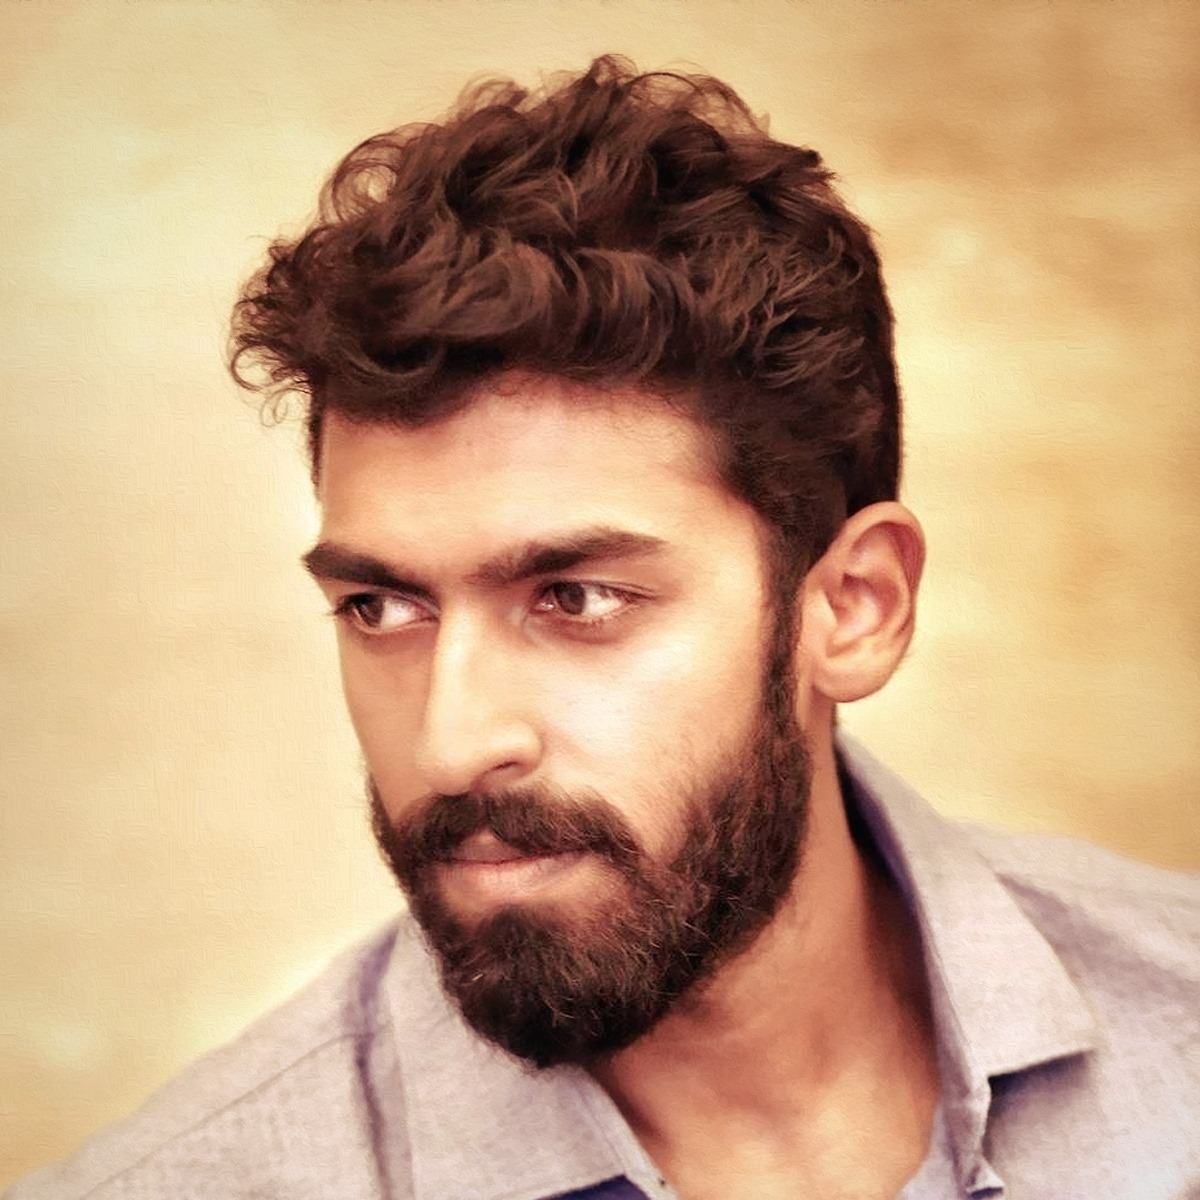 Join With Us In Wishing Royal Star @vinayrajkumar A Very Happy Birthday 🎂🎉🎈 Have an amazing year ahead 👍 Send Your Warm Wishes Here 👇 filmibeat.com/celebs/vinay-r… #HBDVinayRajkumar #HappyBirthdayVinayRajkumar #VinayRajkumar #Pepe #Gramayana